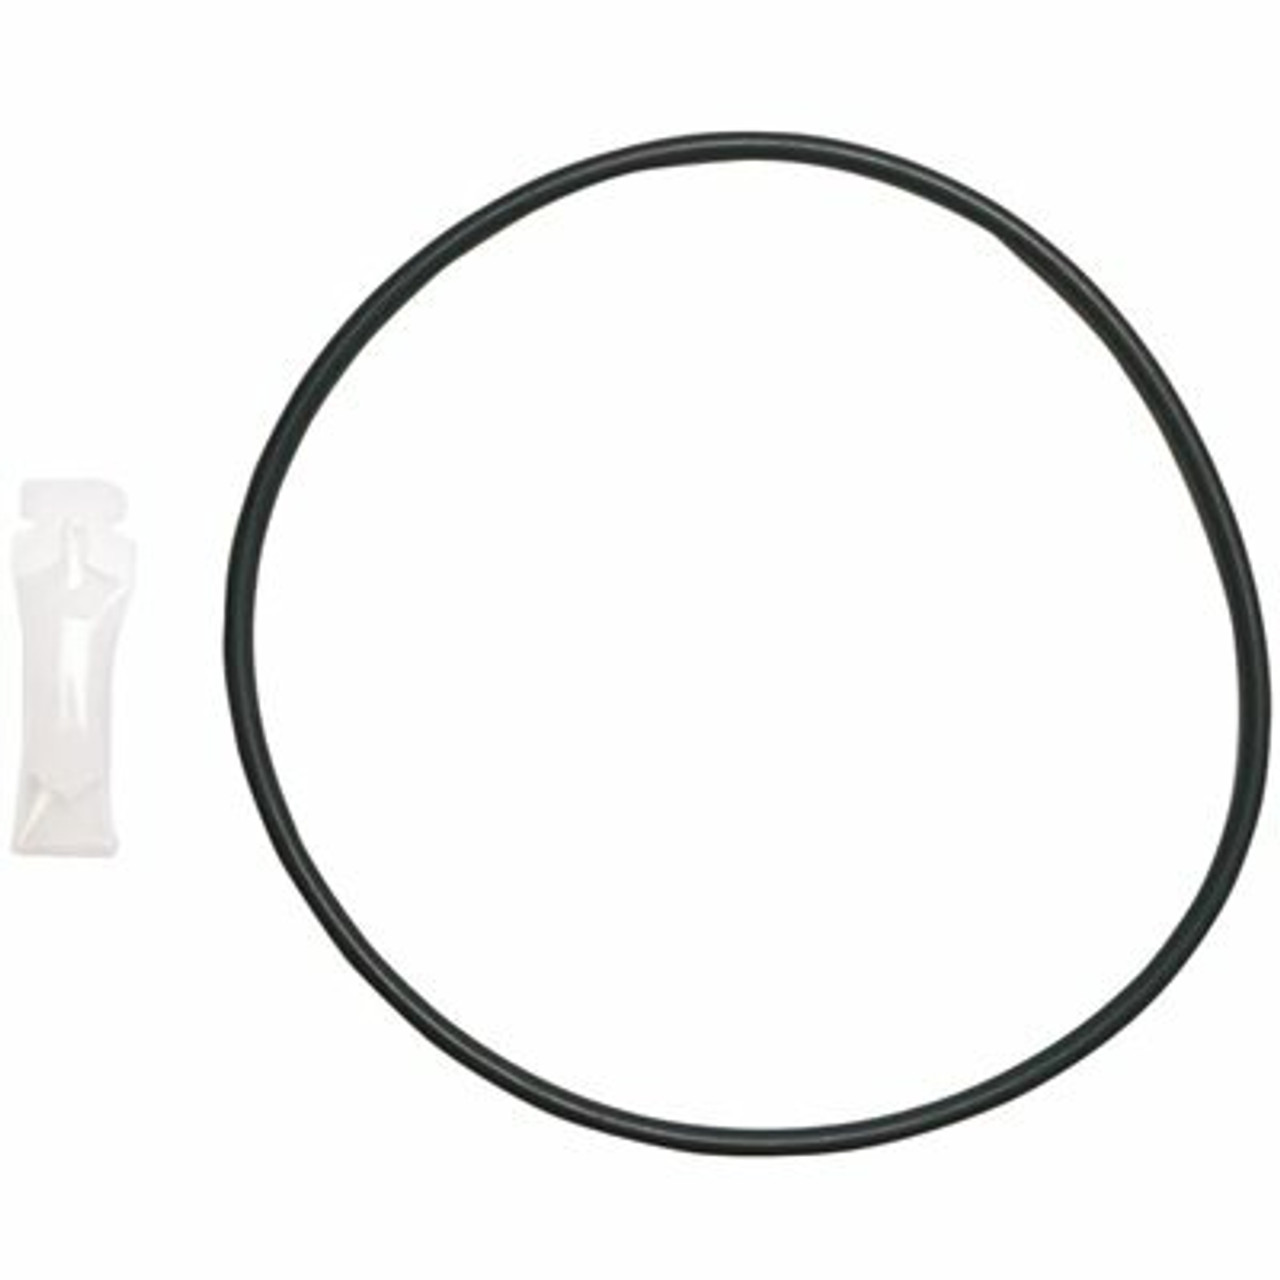 Ge Water Filtration Replacement "O" Ring